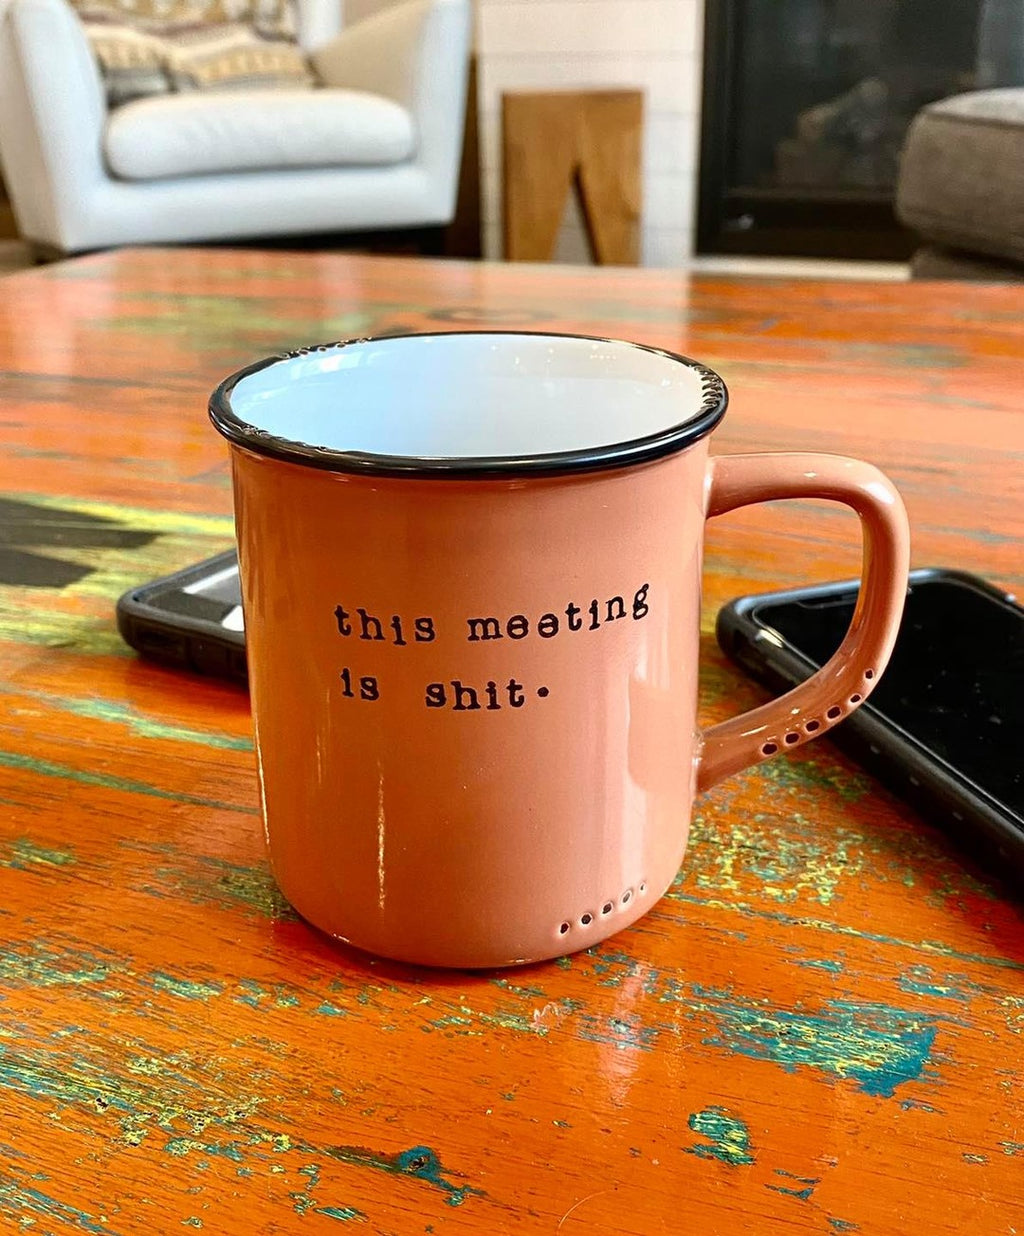 This meeting is shit